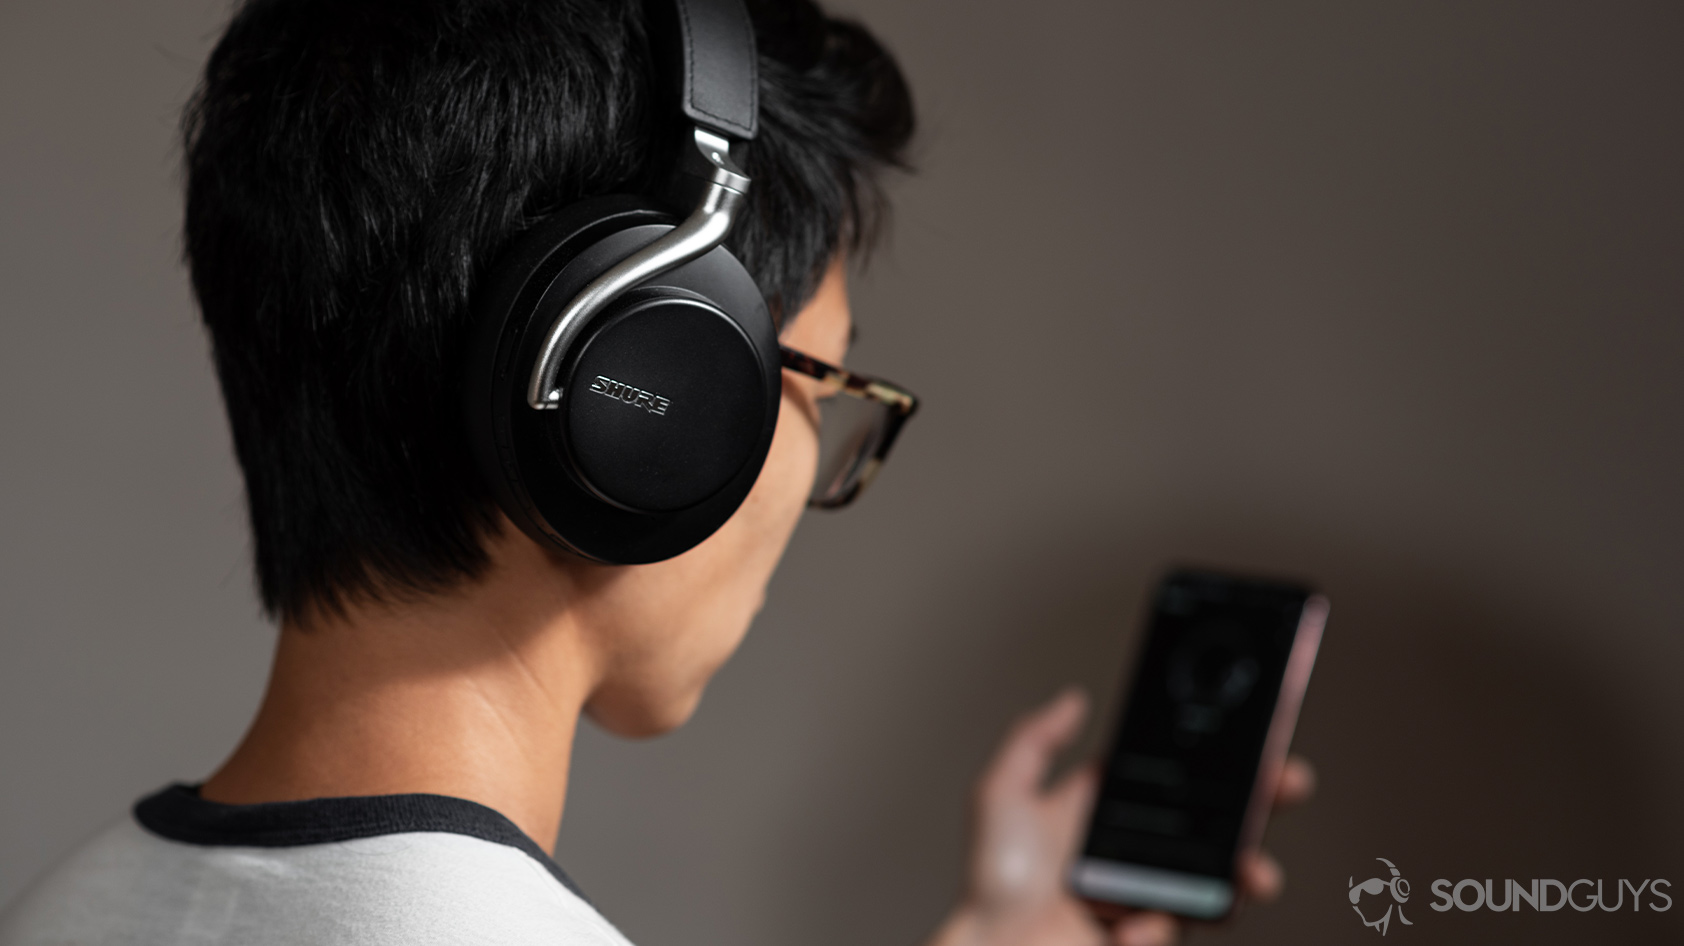 A picture of a woman wearing the Shure AONIC 50 noise canceling headphones and using the Shure PlayPlus headphone app, used to demonstrate the differences of the Sony WH-1000XM4 vs Shure AONIC 50.